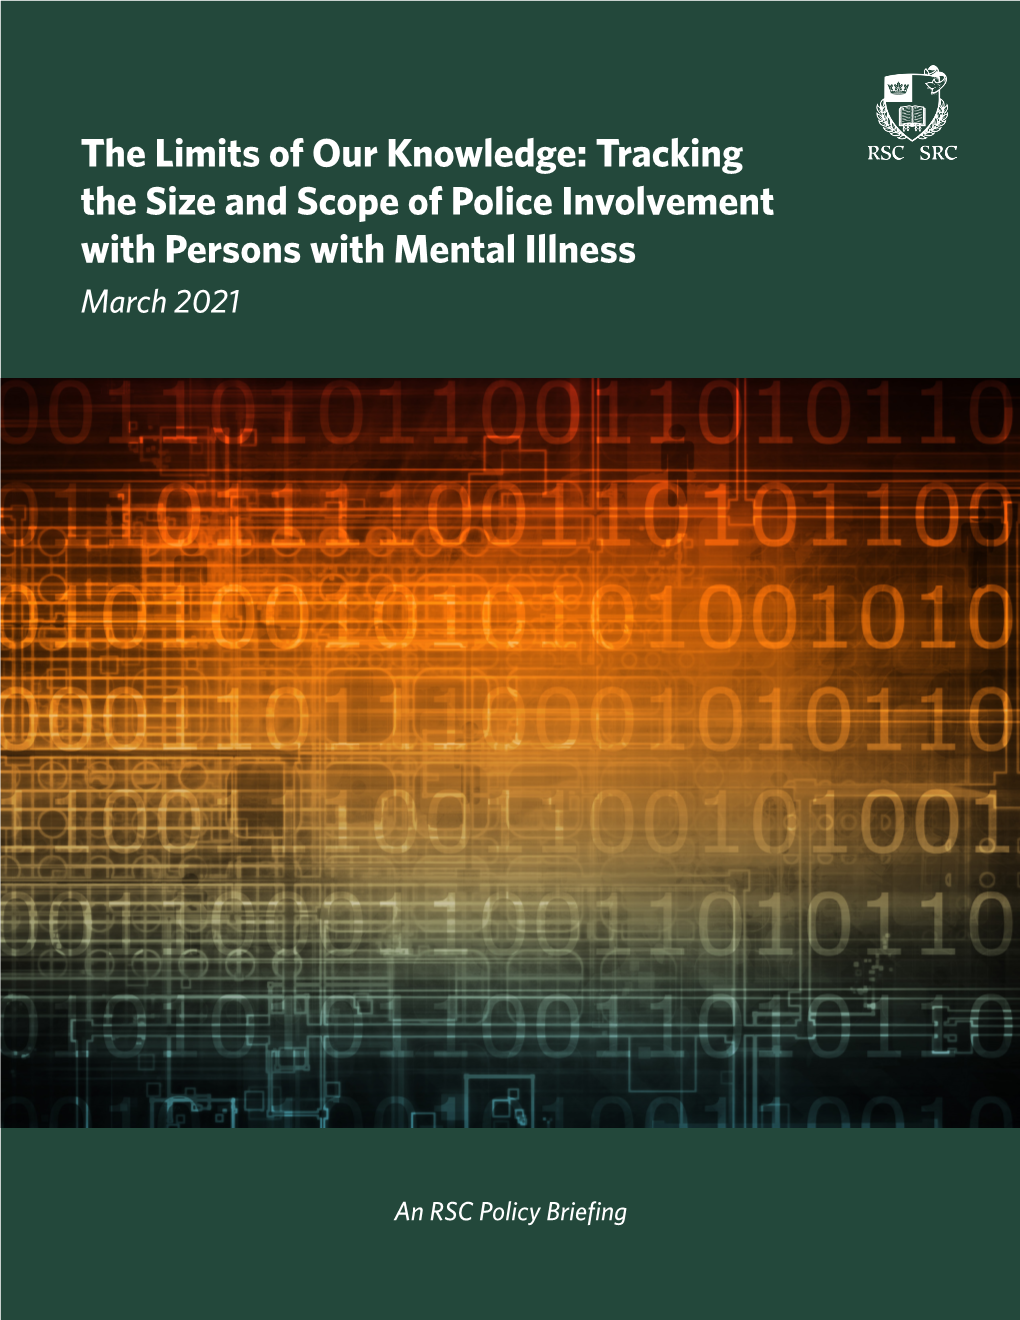 Tracking the Size and Scope of Police Involvement with Persons with Mental Illness March 2021